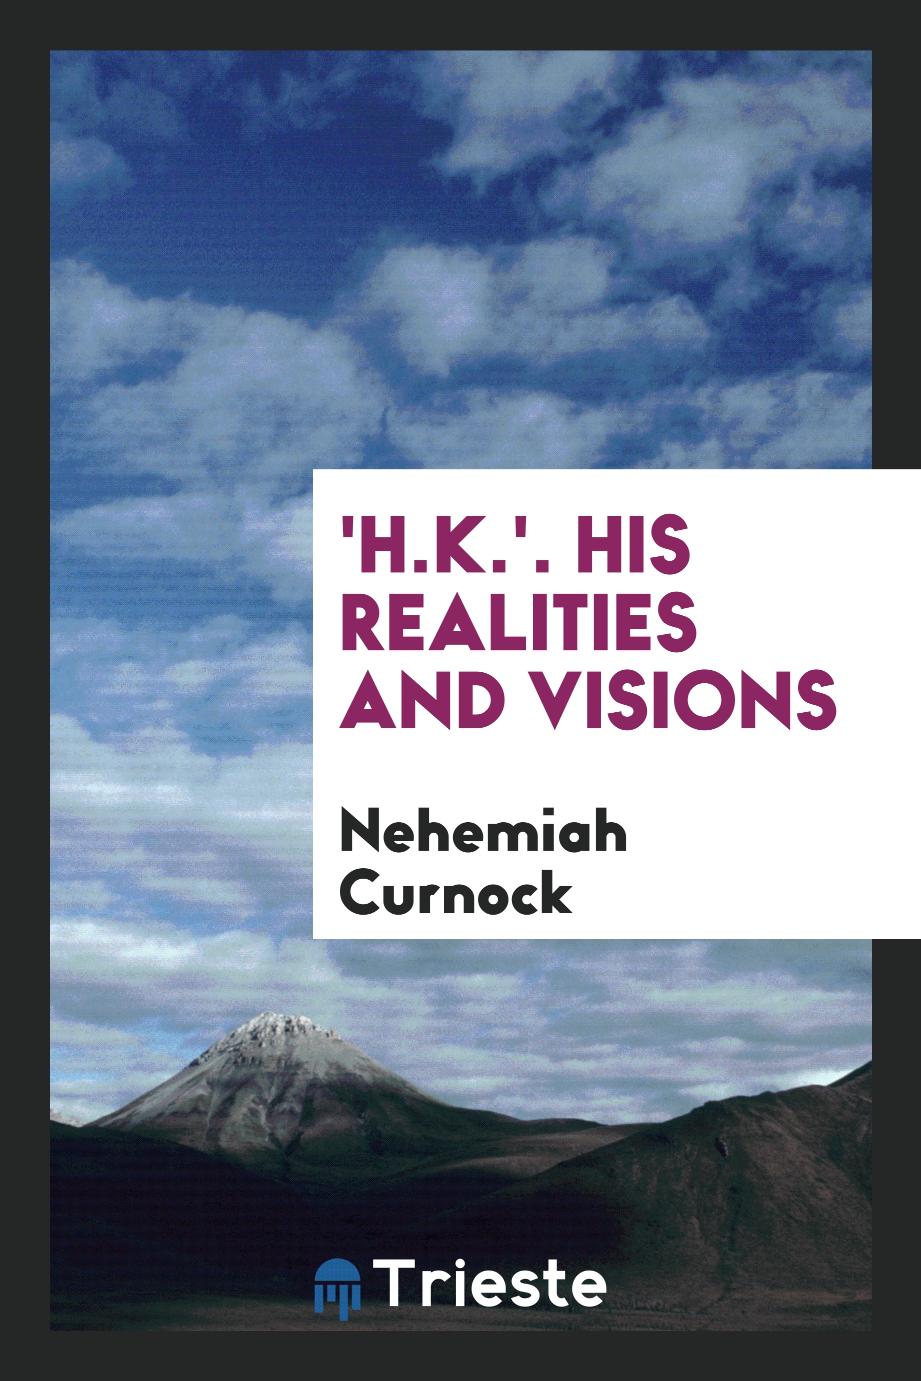 'H.K.'. His realities and visions